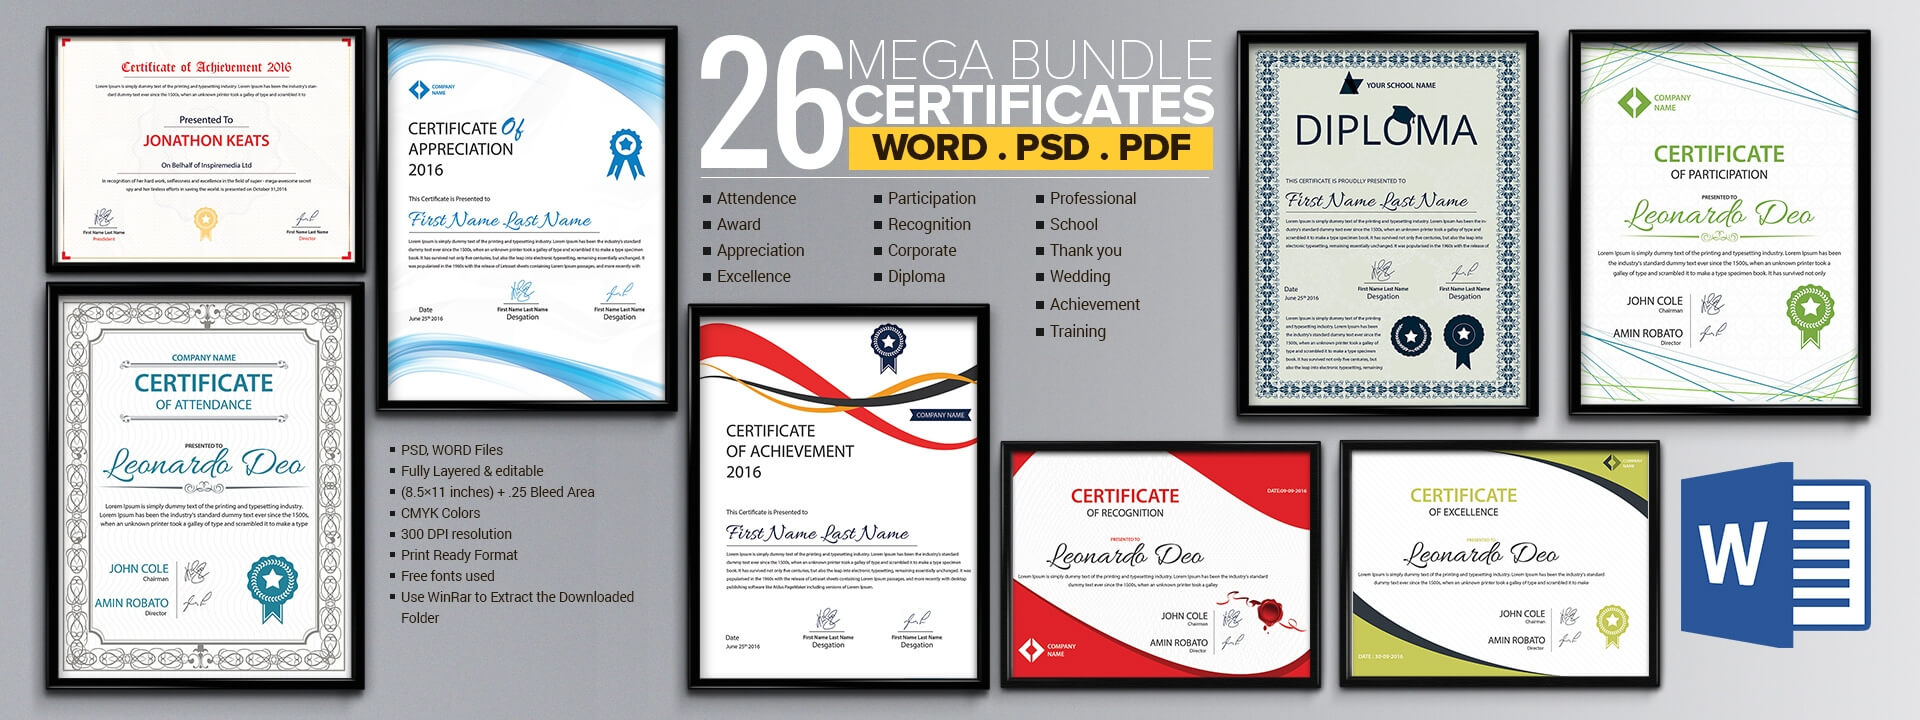 Word Certificate Template – 53+ Free Download Samples Intended For Downloadable Certificate Templates For Microsoft Word